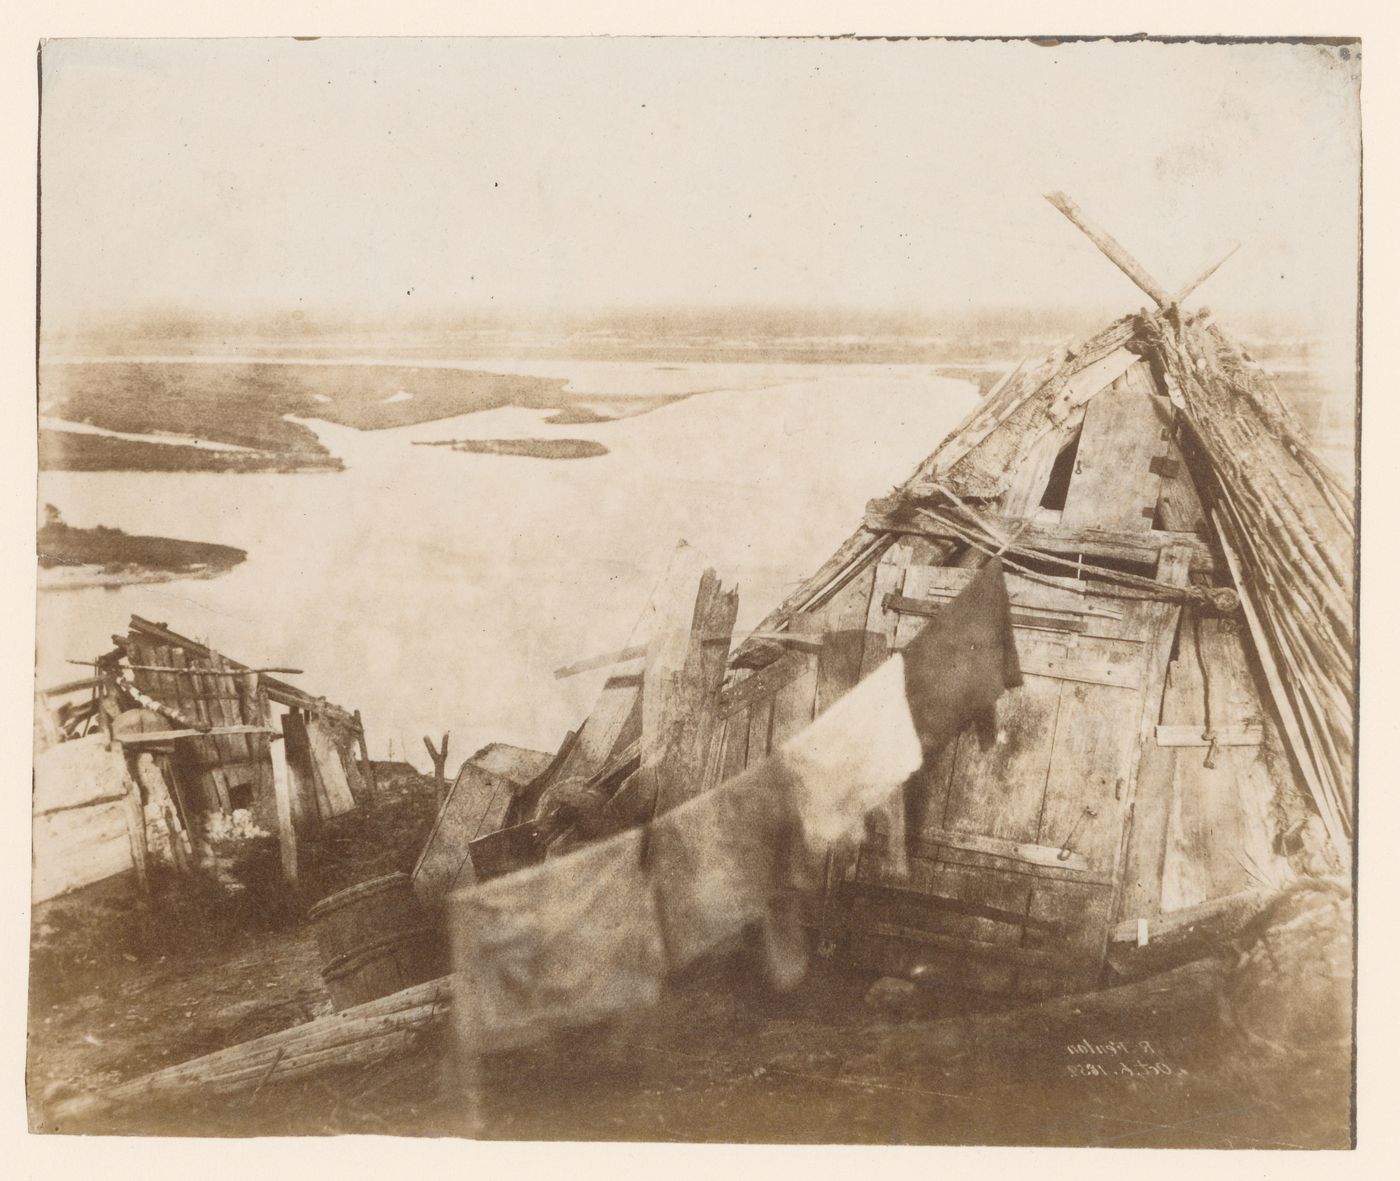 View of self-built wooden sheds with clothes line overlooking water (probably the Dnieper River) near Kiev, Russia (now Kyiv, Ukraine)